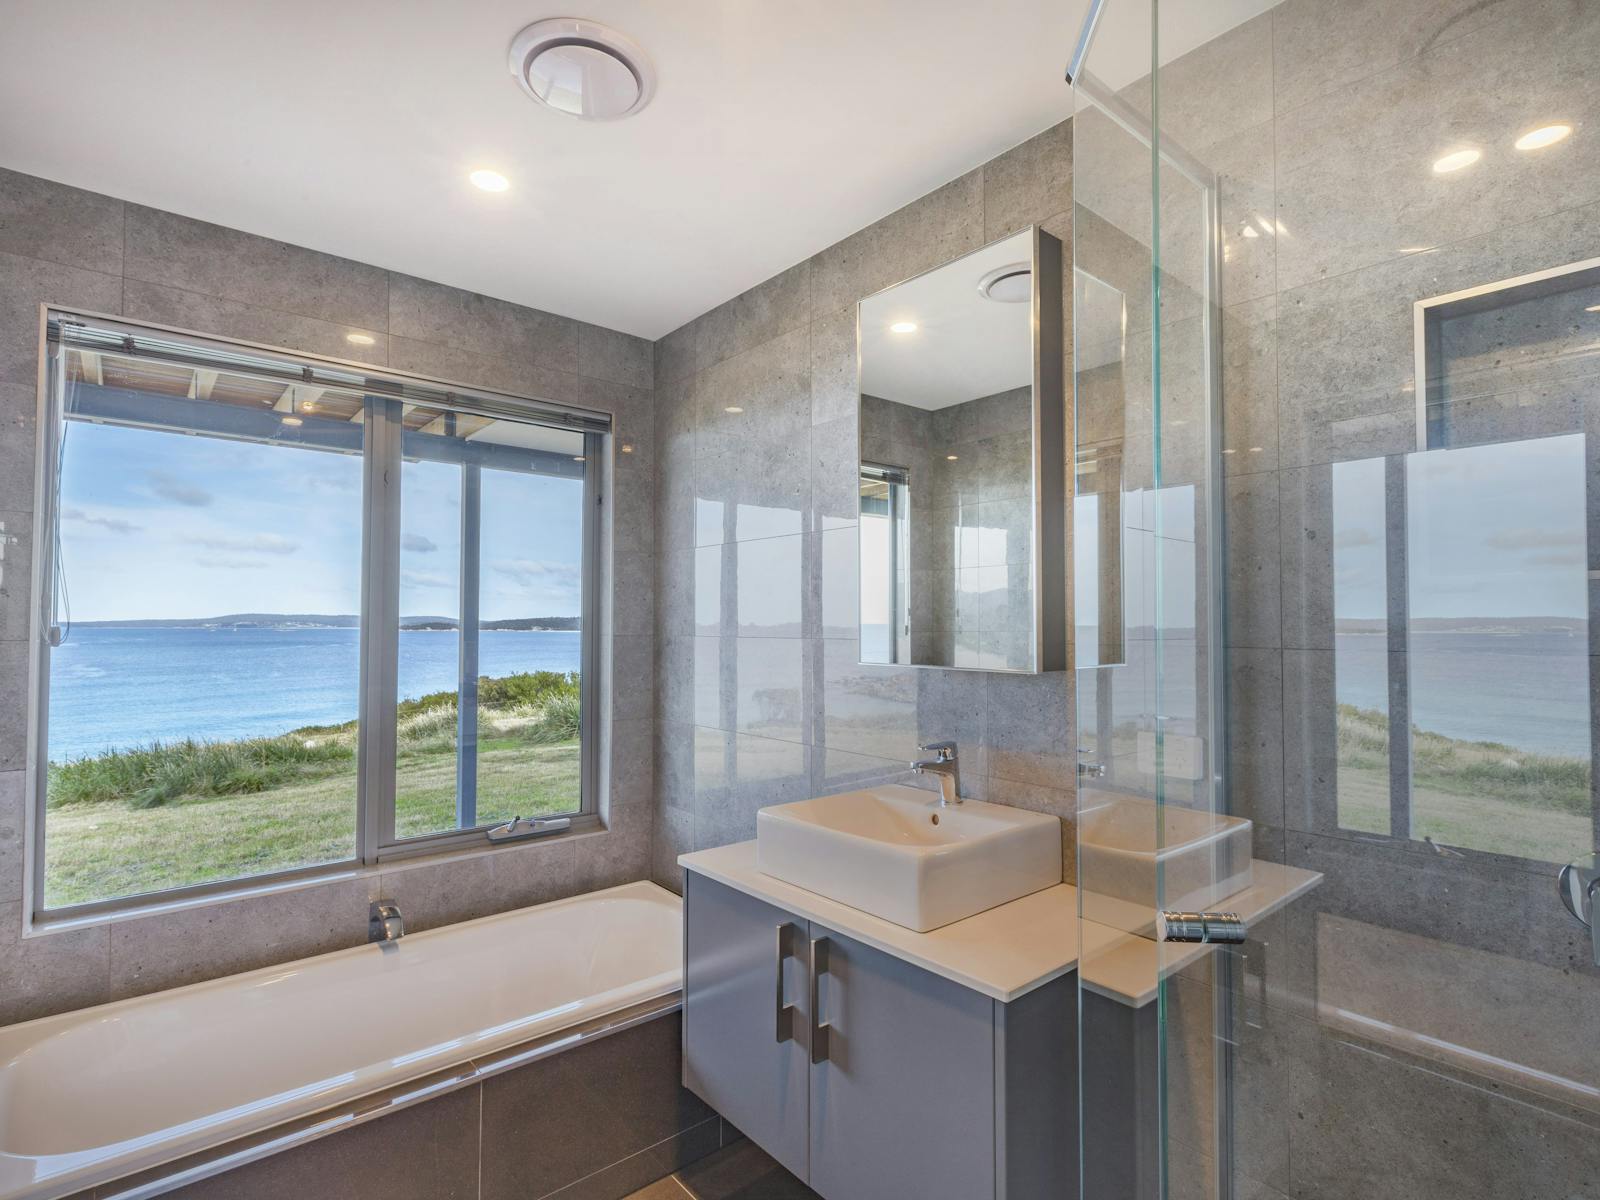 Tranquility Bay of Fires Bathroom